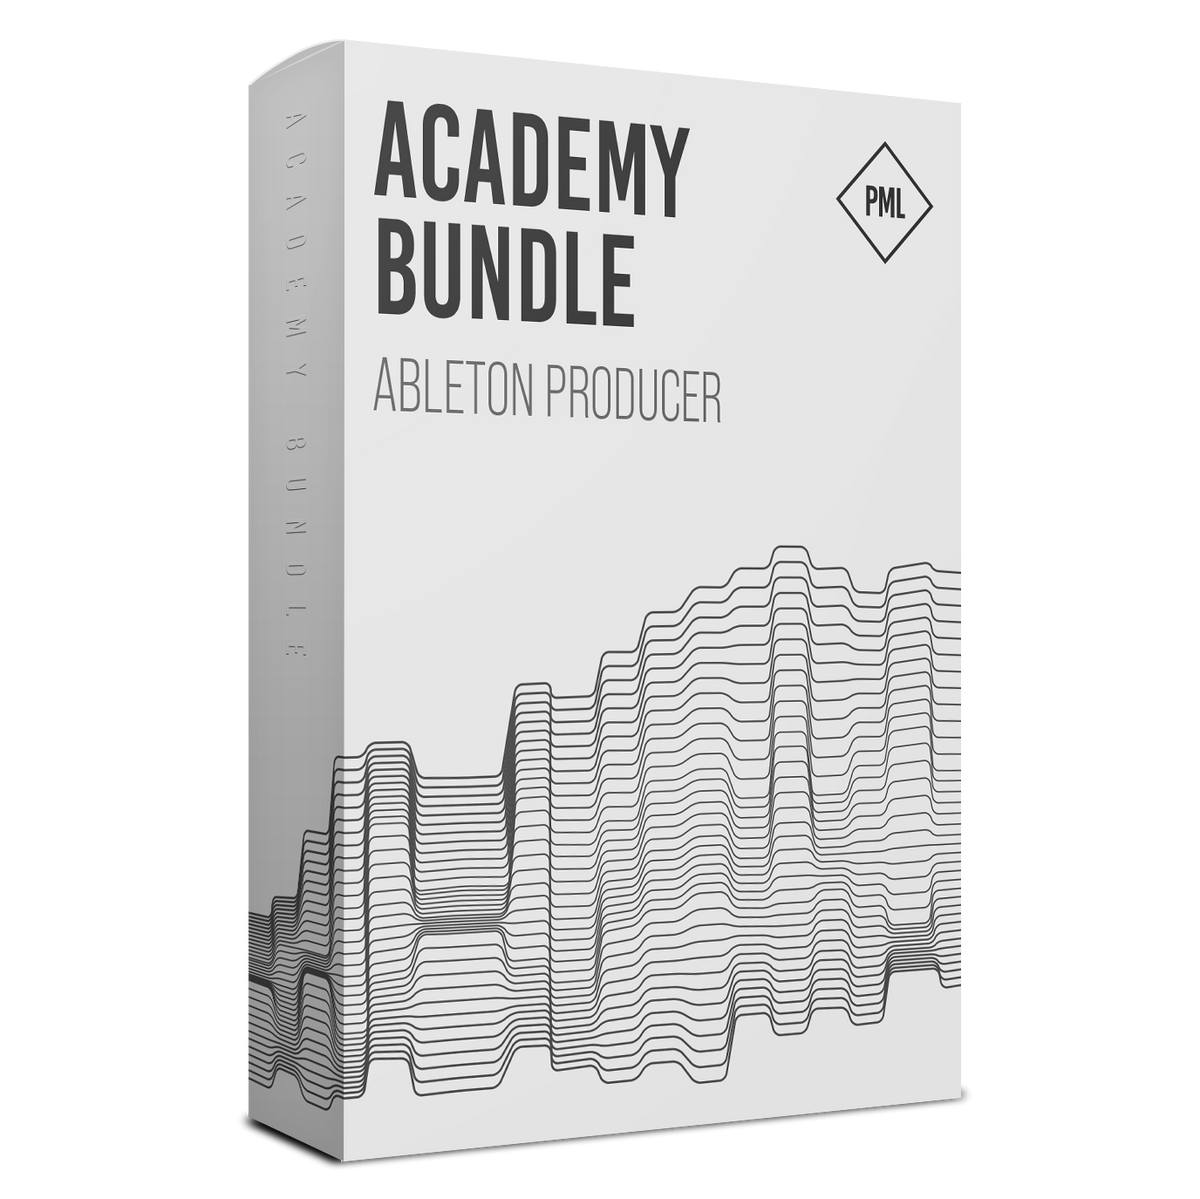 Academy Bundle - Electronic Music Production in Ableton Product Box